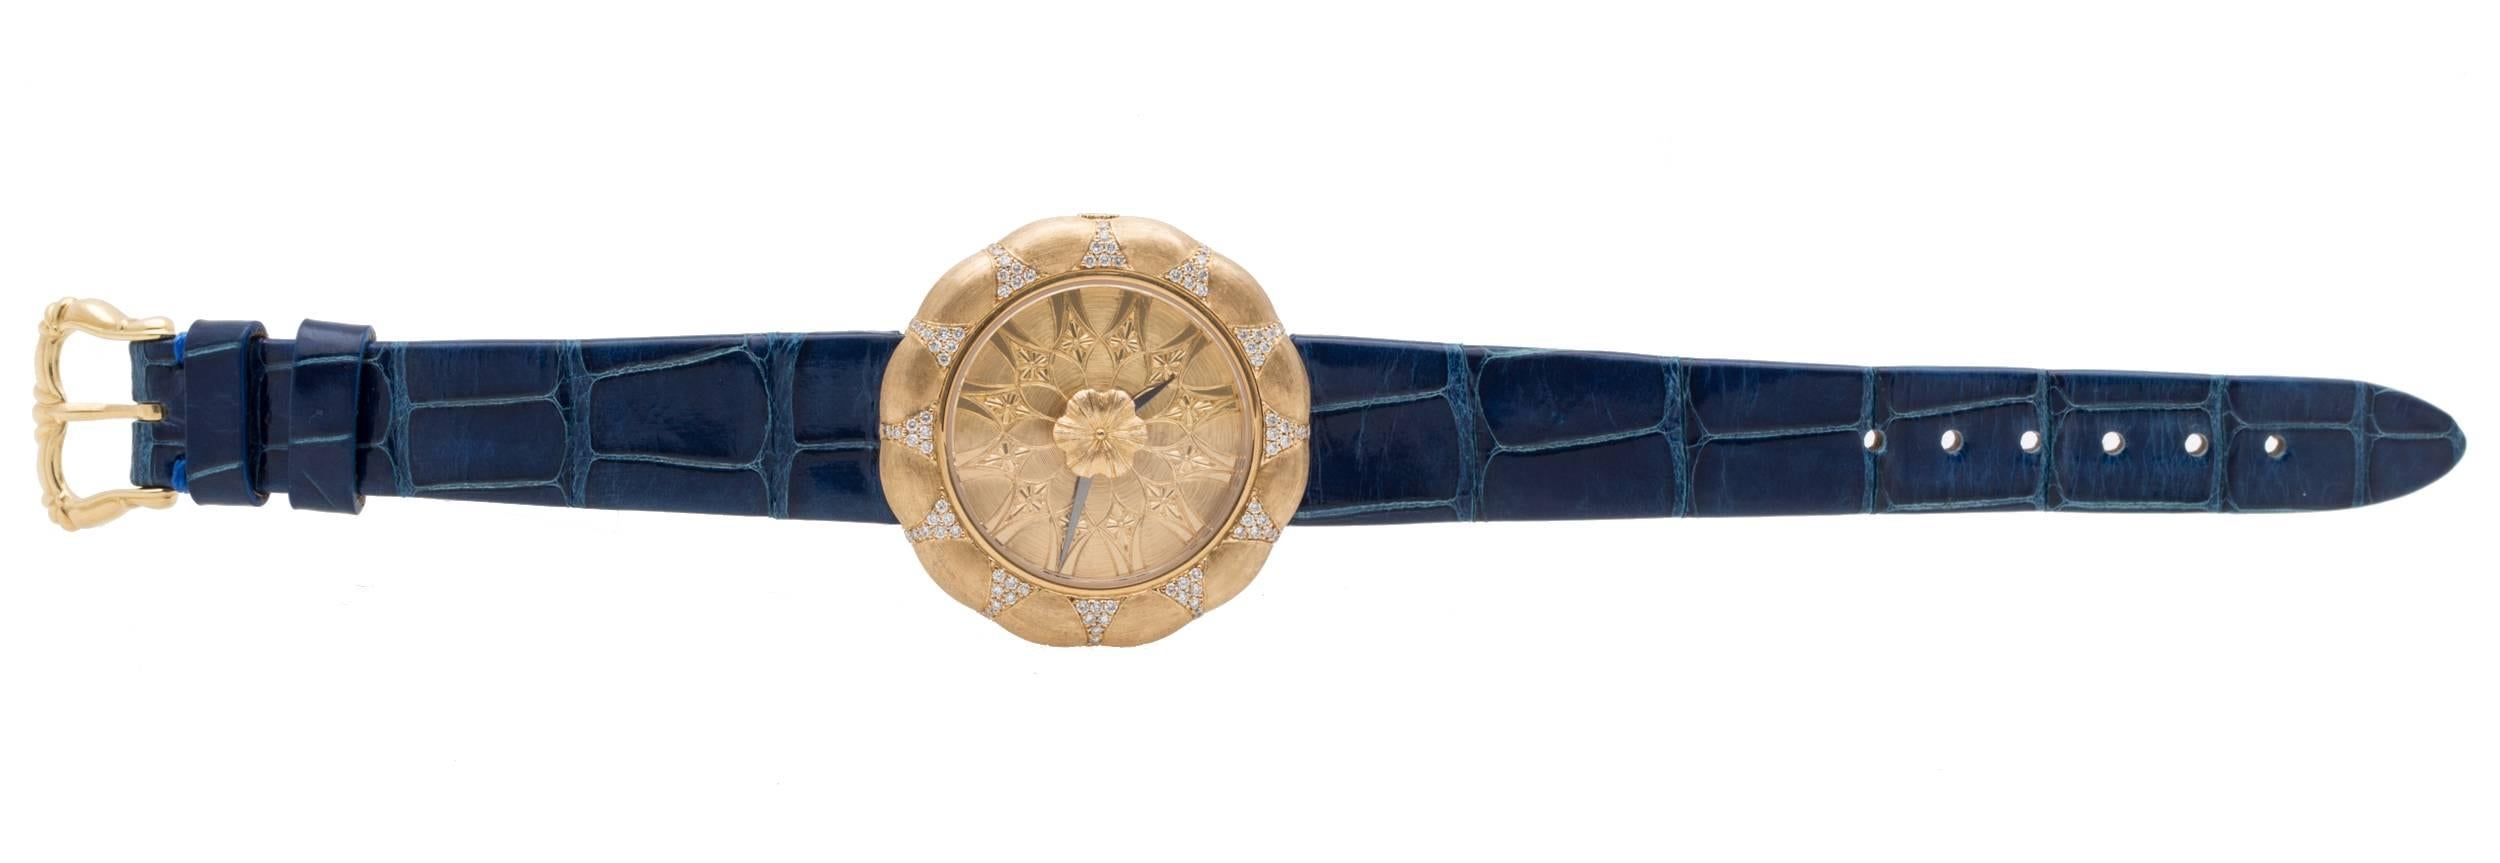 Buccellati Eliochron 35 Ladies Watch in 18K Textured Yellow Gold, Diamond Bezel, Gold Dial, 35mm Case, Quartz Movement, Blue Alligator Strap w/ Gold Buckle, New With Box and Papers, Reference Number: W0801102 QTZ, Retail Price: $22,200